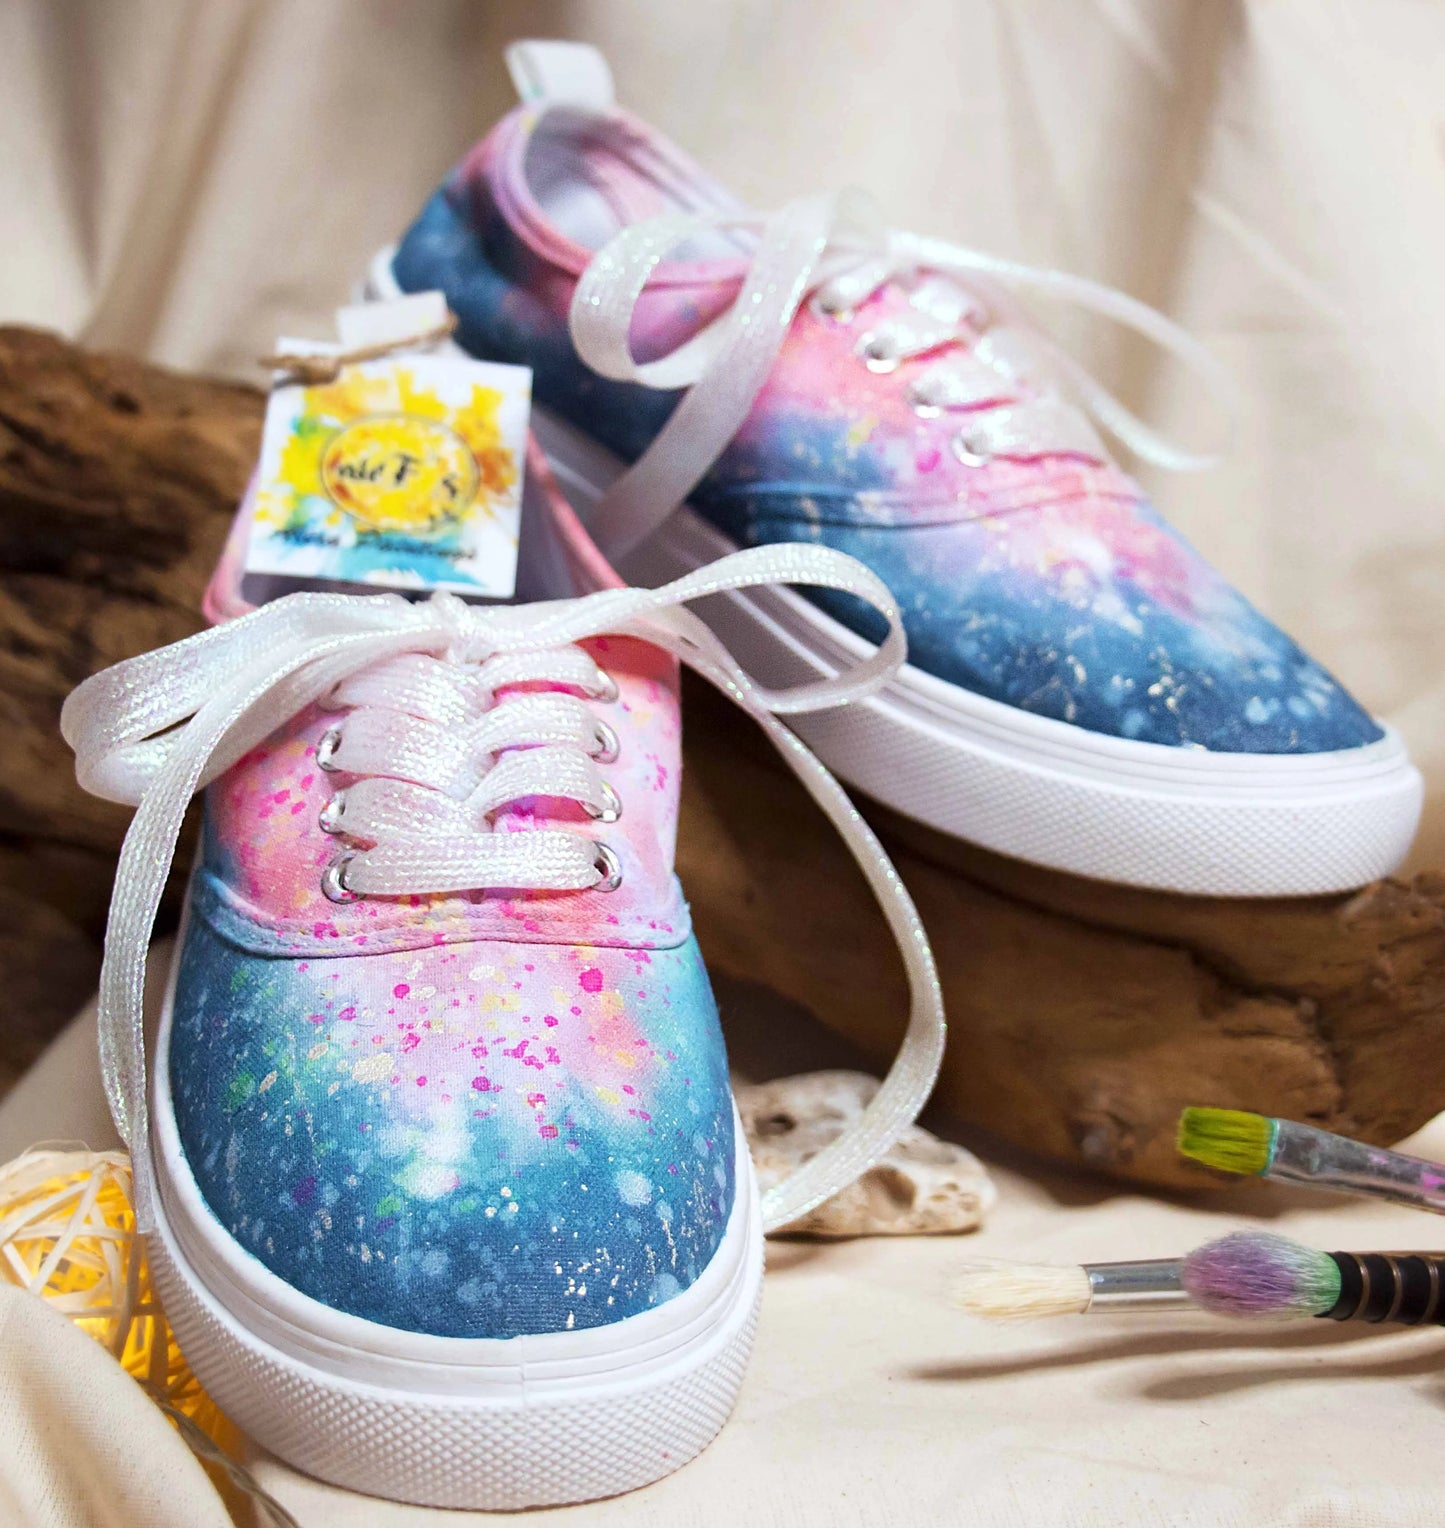 Tenisi Pictati, Painted Sneakers, Pictura Manuala Tenisi, handmade shoes, Everyday shoes, Woman Fashion, customized shoes, Holi, Holi Sneakers, Nature, Meaningful painting, look inside, Splash, Splashes